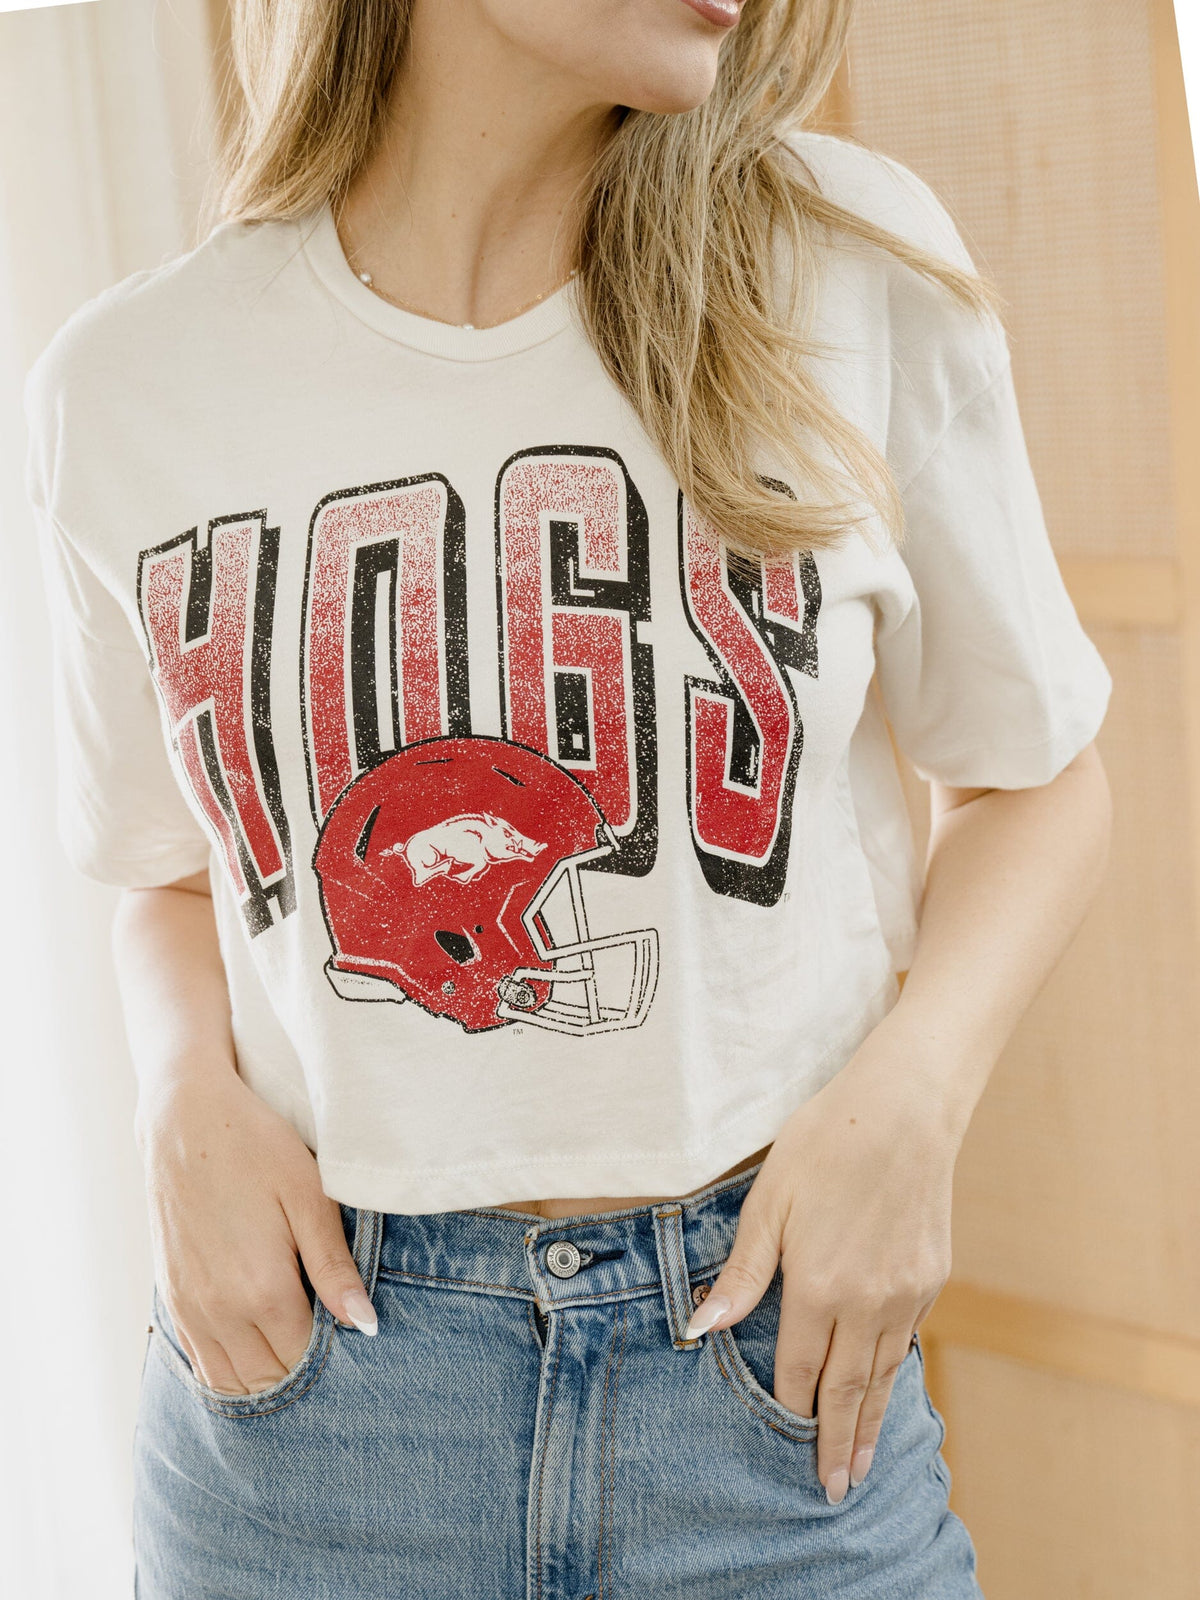 Hogs Helmet Fade Off White Cropped Tee